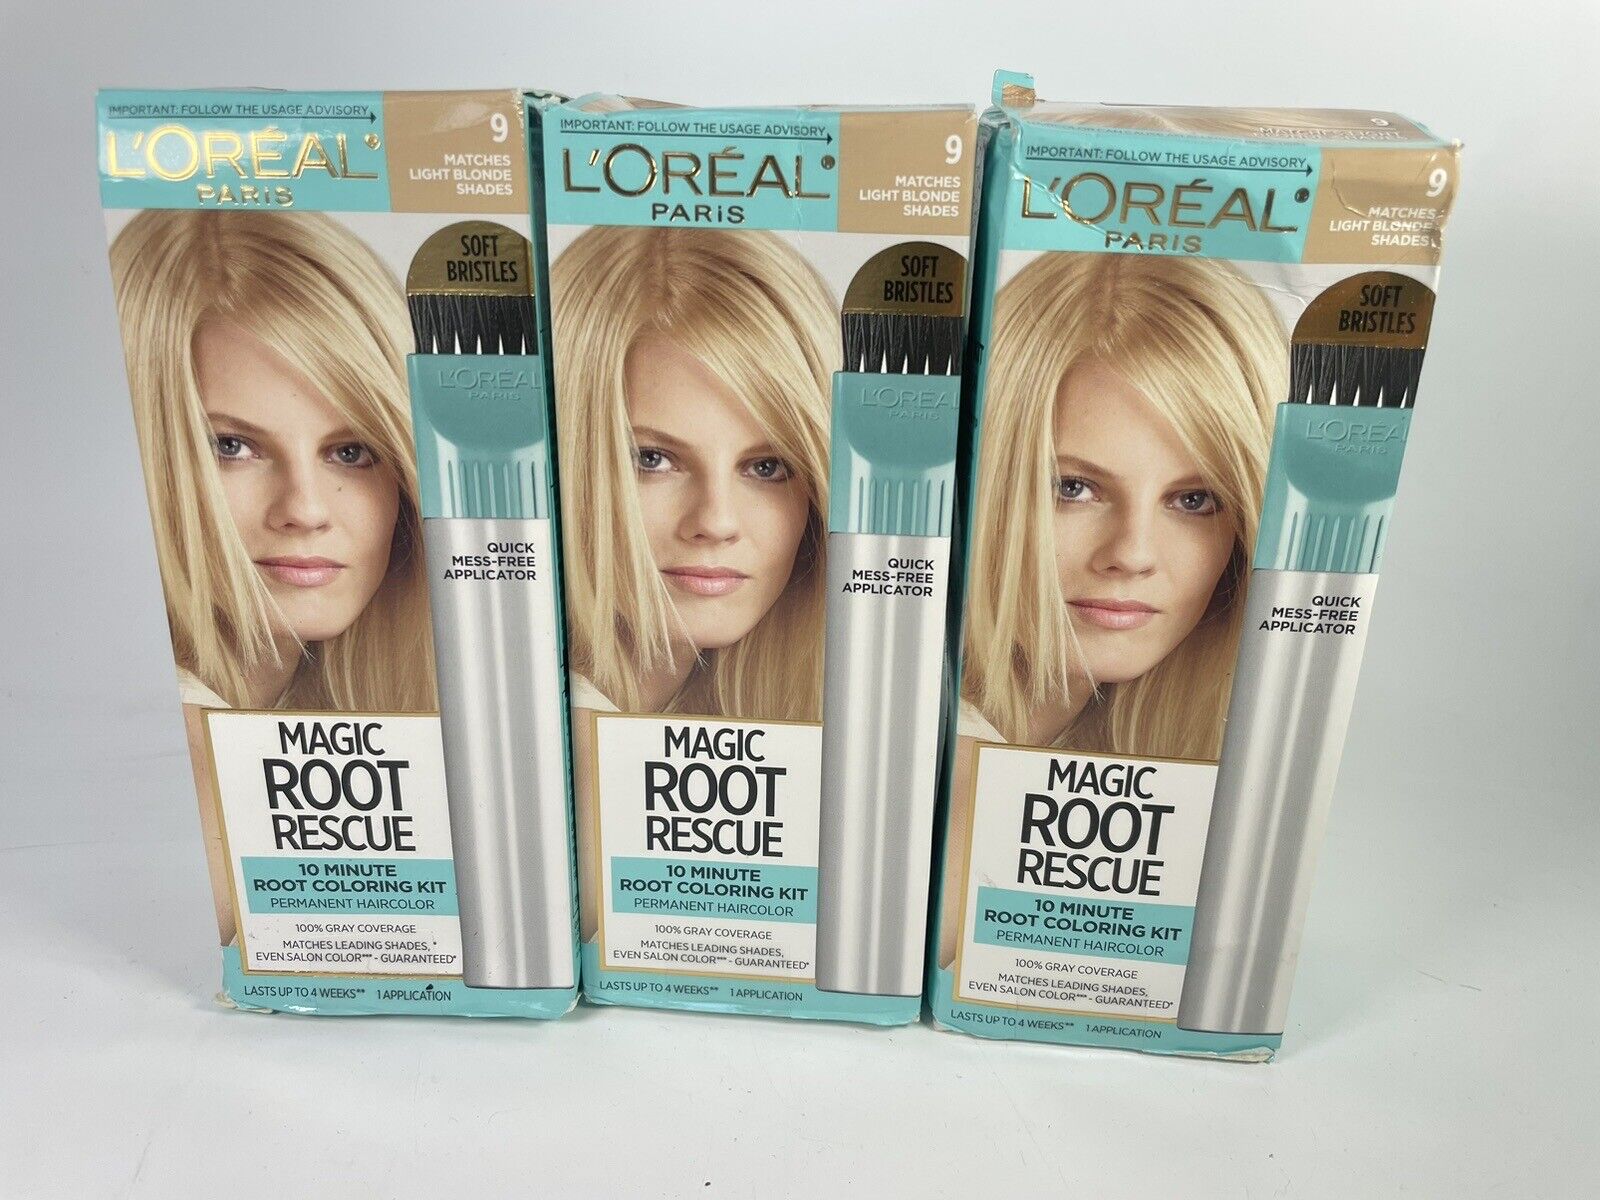 3 New Loreal Magic Root Rescue 10 Minute Kit Matches Light Blonde Shades #9